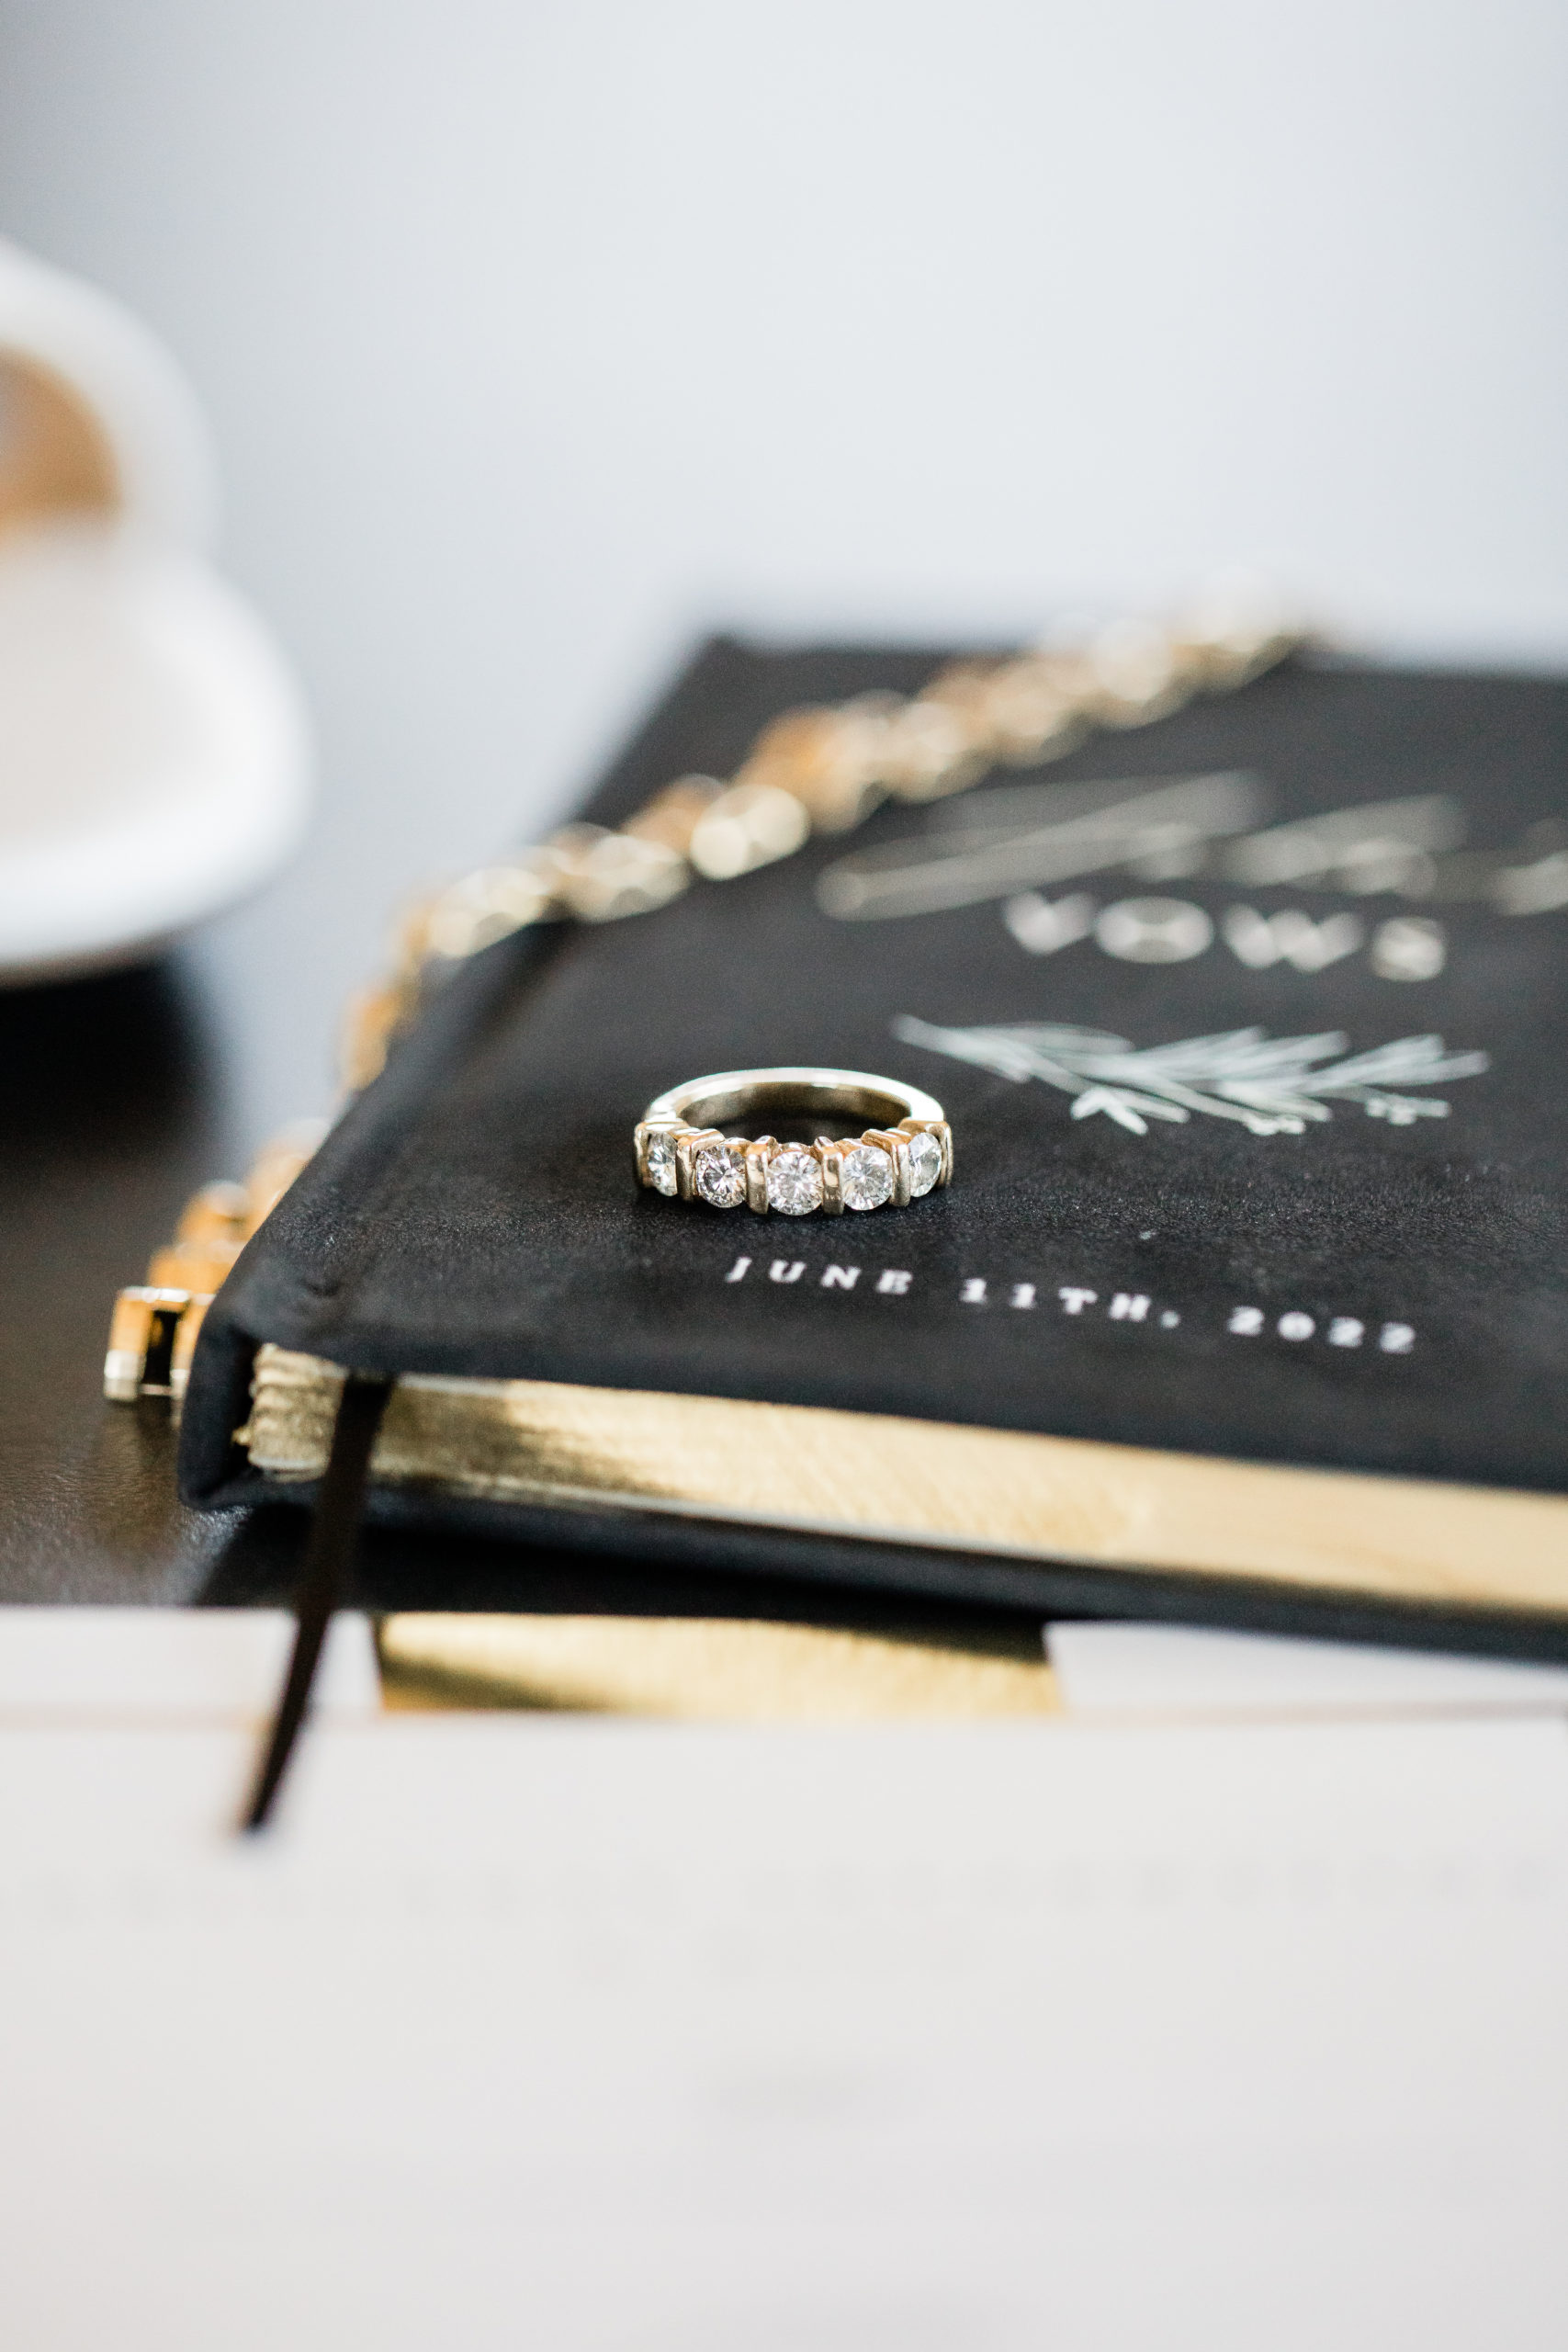 A gold bracelet and two gold rings on top of a "John's vows" book.